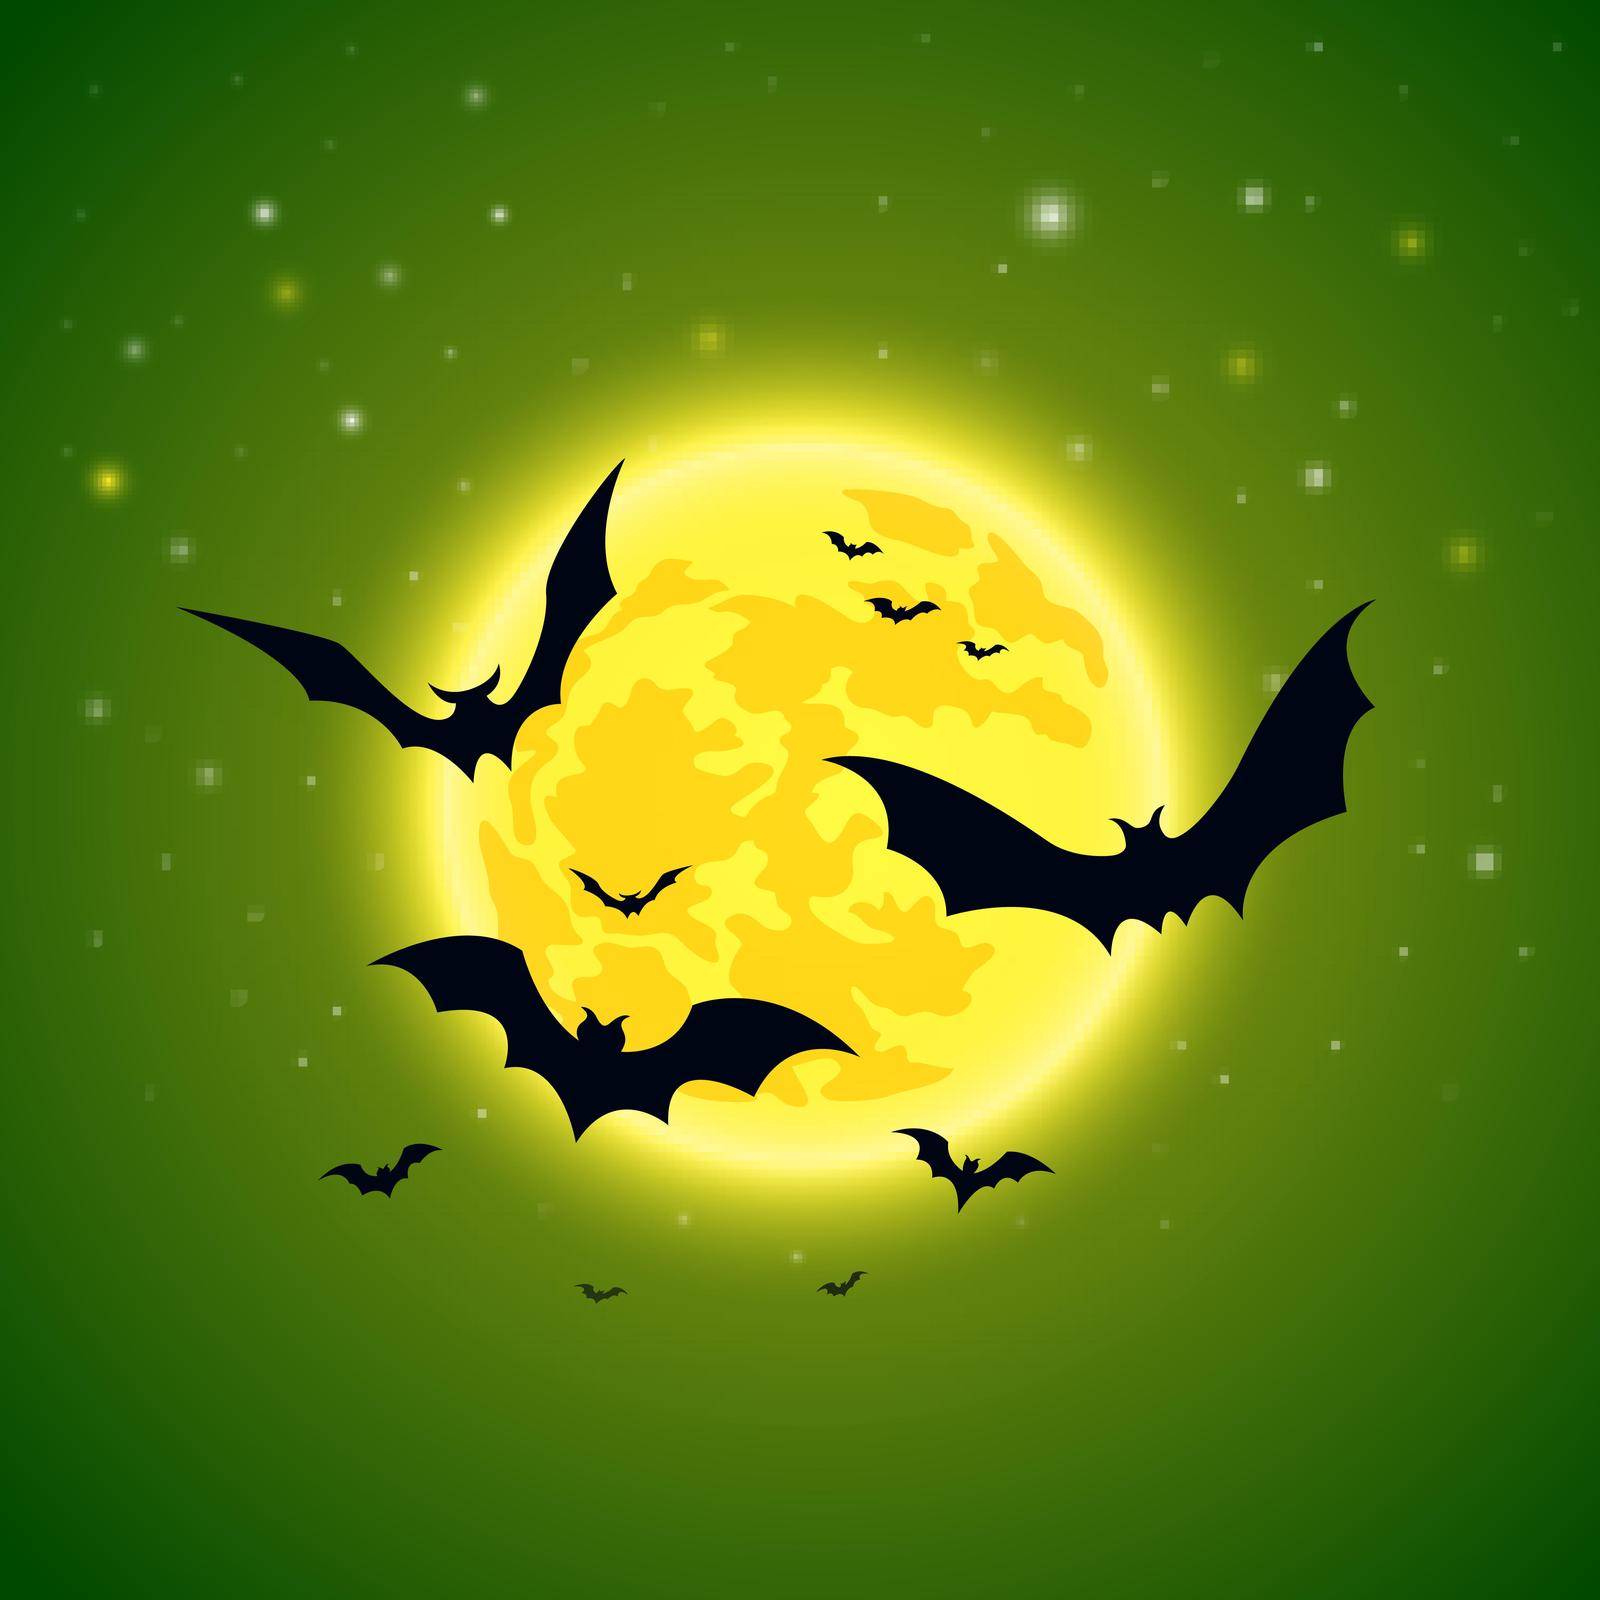 Halloween. Bats on a background of starry sky and full yellow moon. Stock vector illustration.